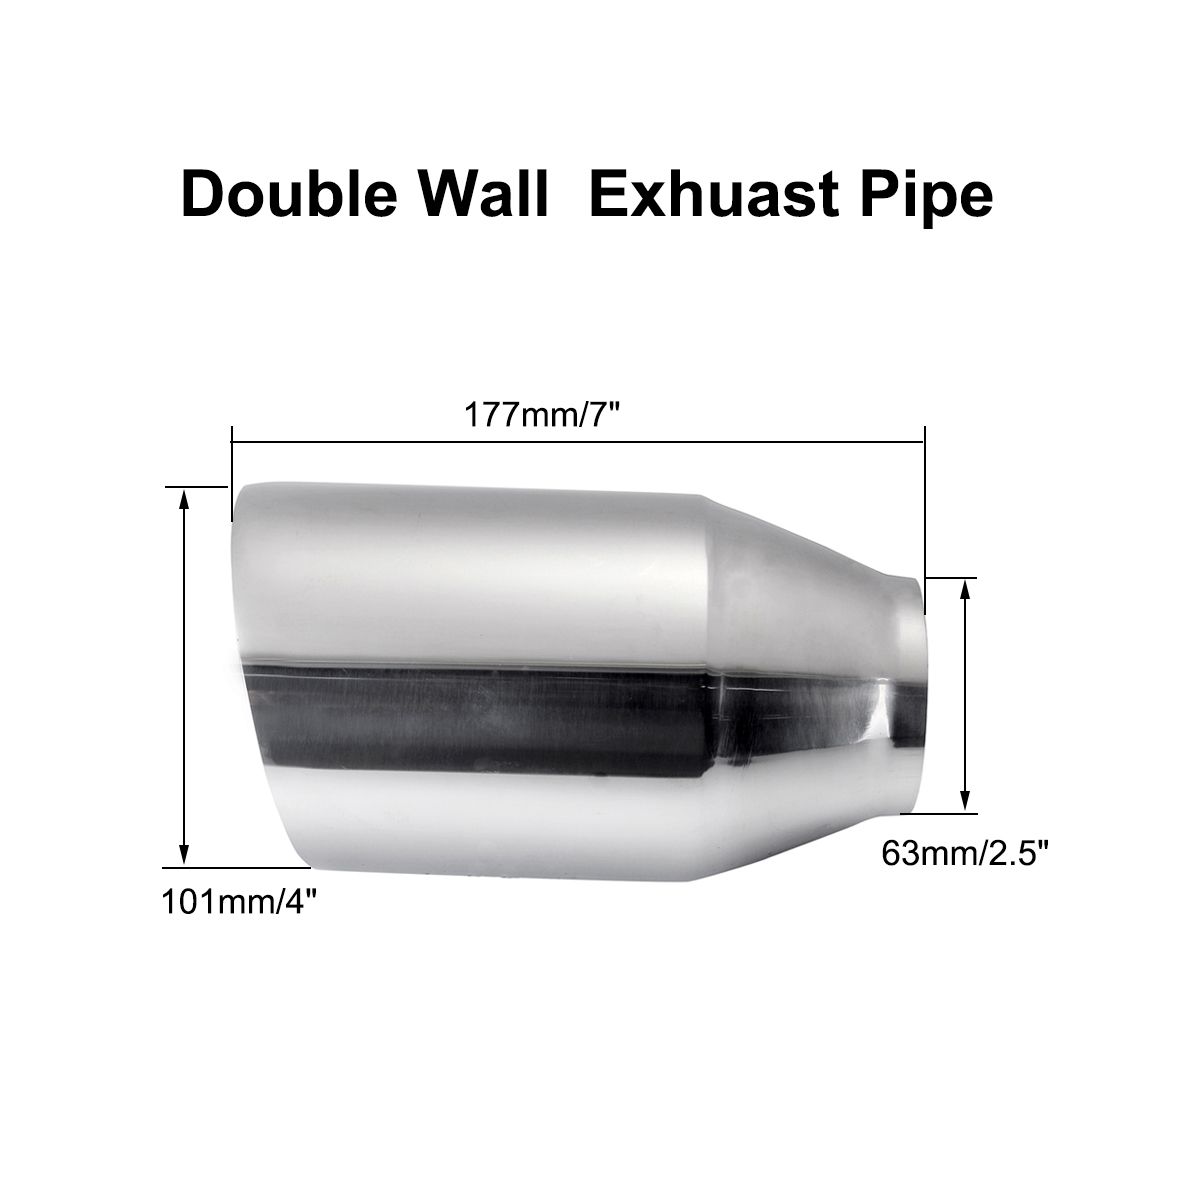 Universal-Stainless-Steel-Exhaust-Muffler-Double-Wall-Round-Slant-25-Inch-Inelt-4-Inch-Outlet-1352073